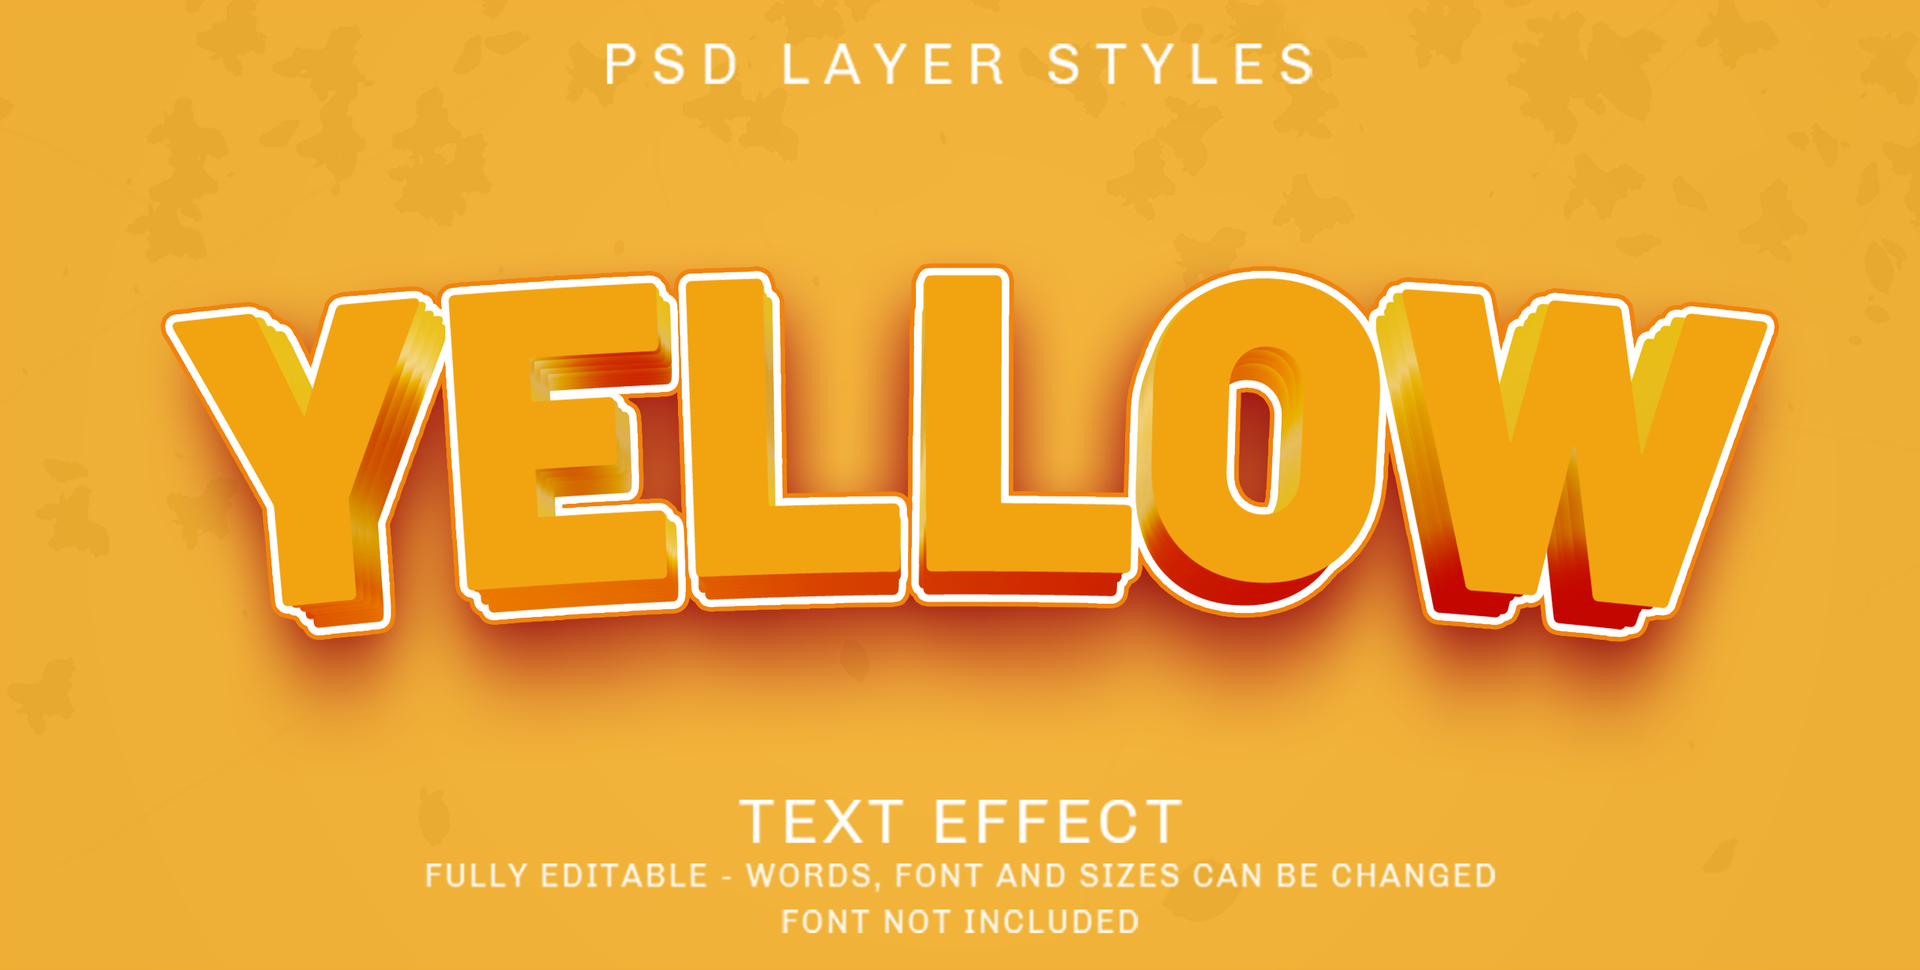 3d solid yellow - editable text effect psd